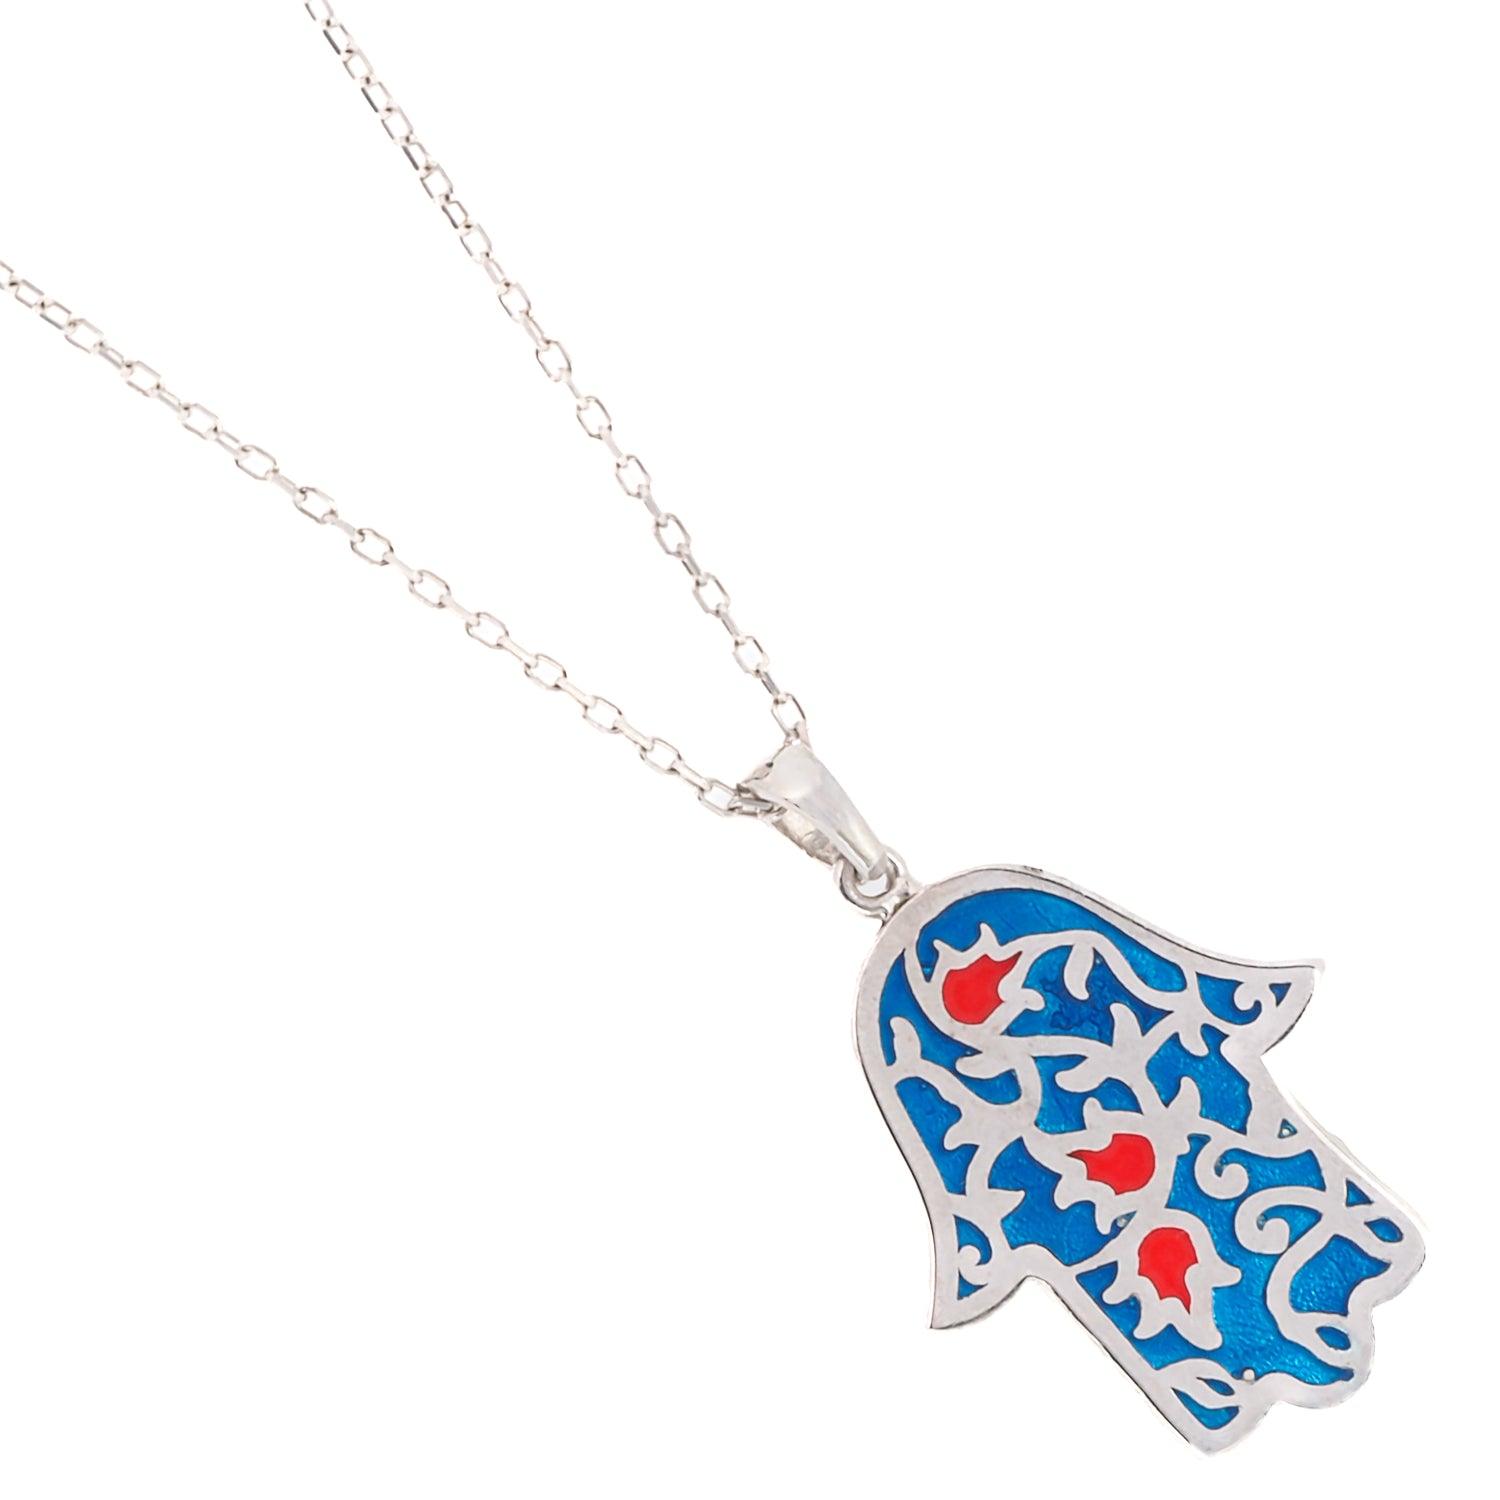 The Good Vibes Enamel Hamsa Necklace Silver, a meaningful accessory radiating positivity and love.